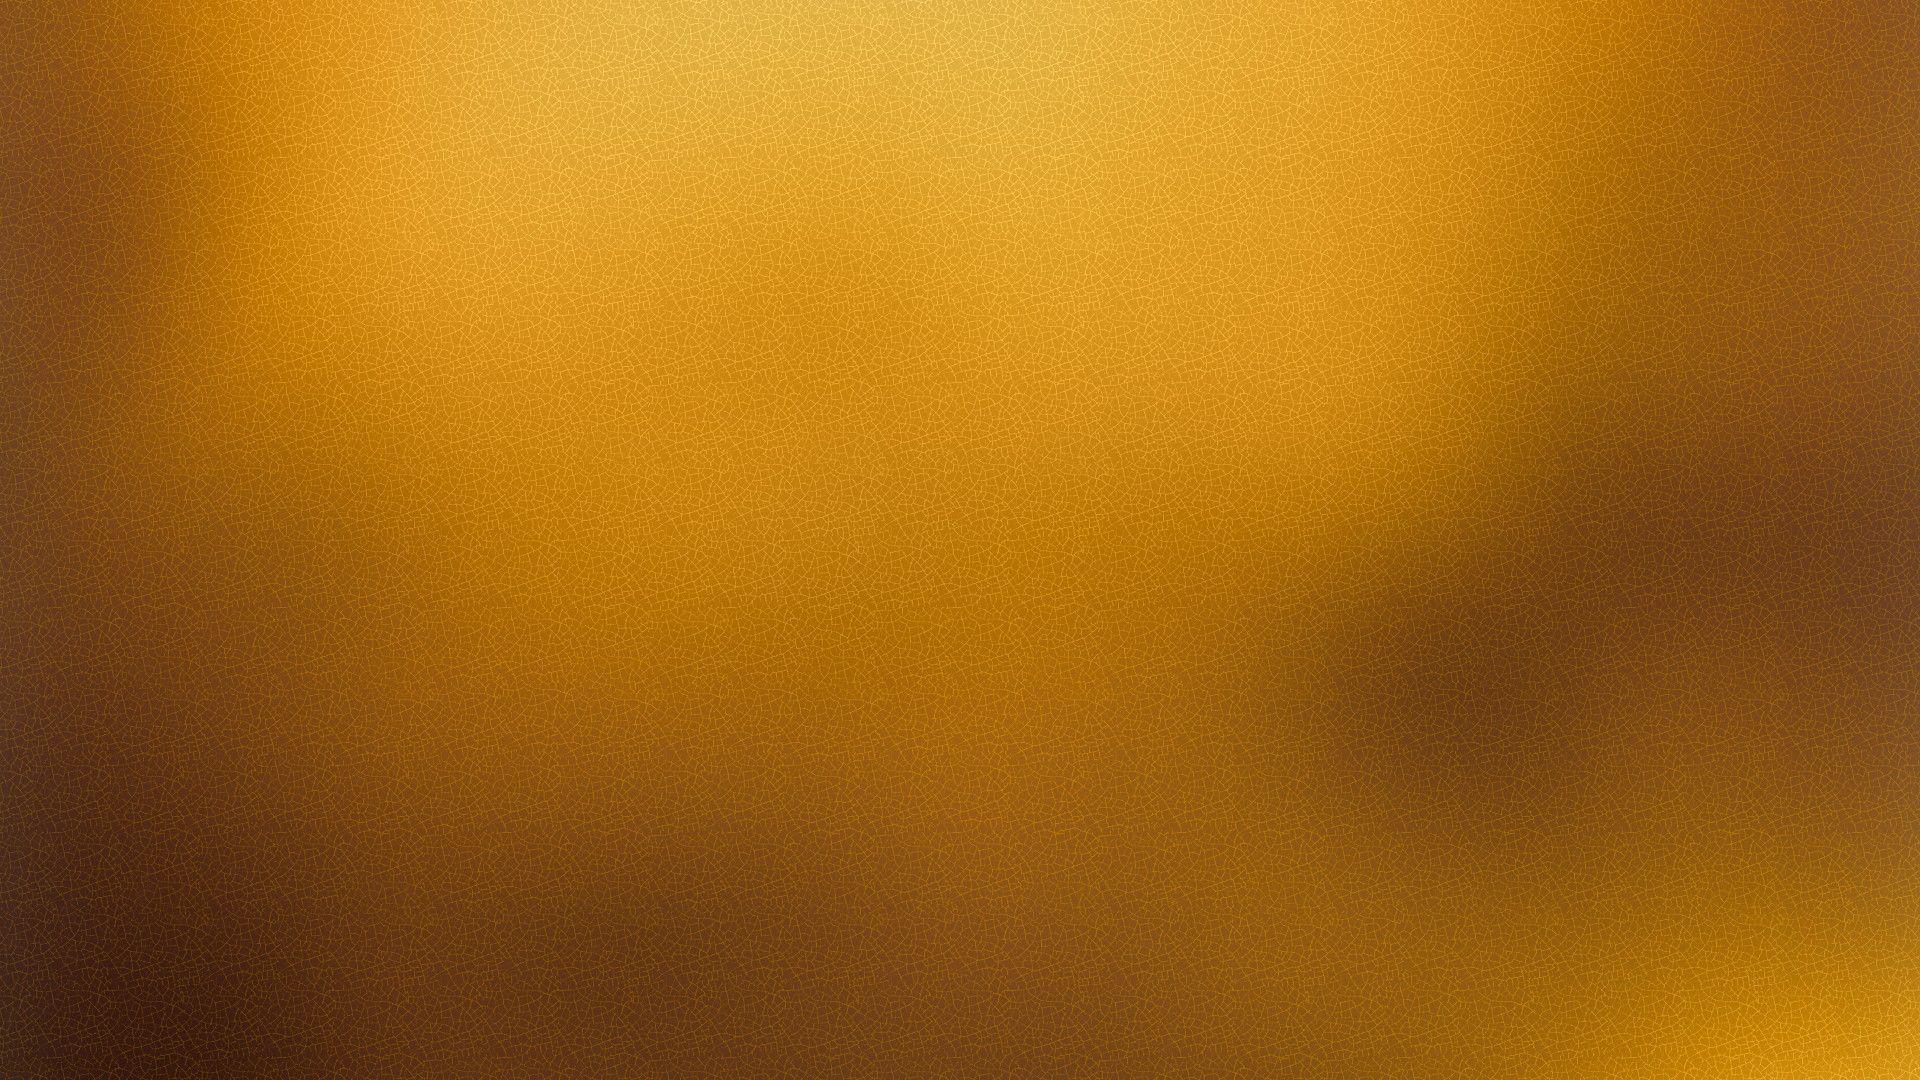 Metallic Gold backgroundDownload free awesome High Resolution